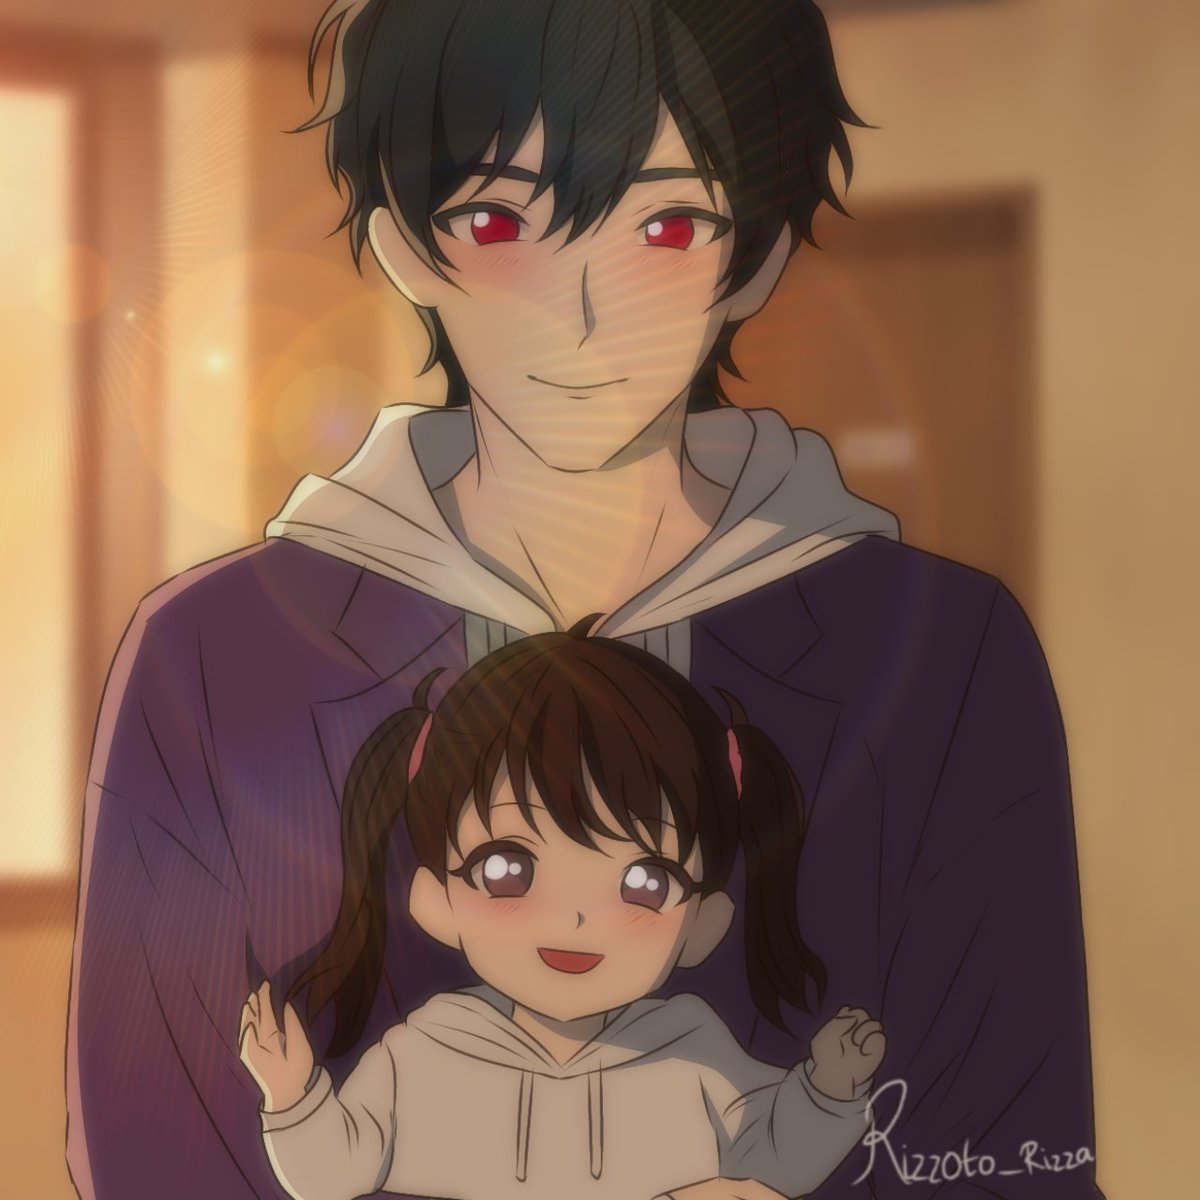 For event Tukar Kado, just a father with his beloved little girl, special for @maho_anpu 

And thank you so much for the event too! Hope you enjoy this art!!

#arttrade #secretsanta #ArtistOnTwitter #ocart